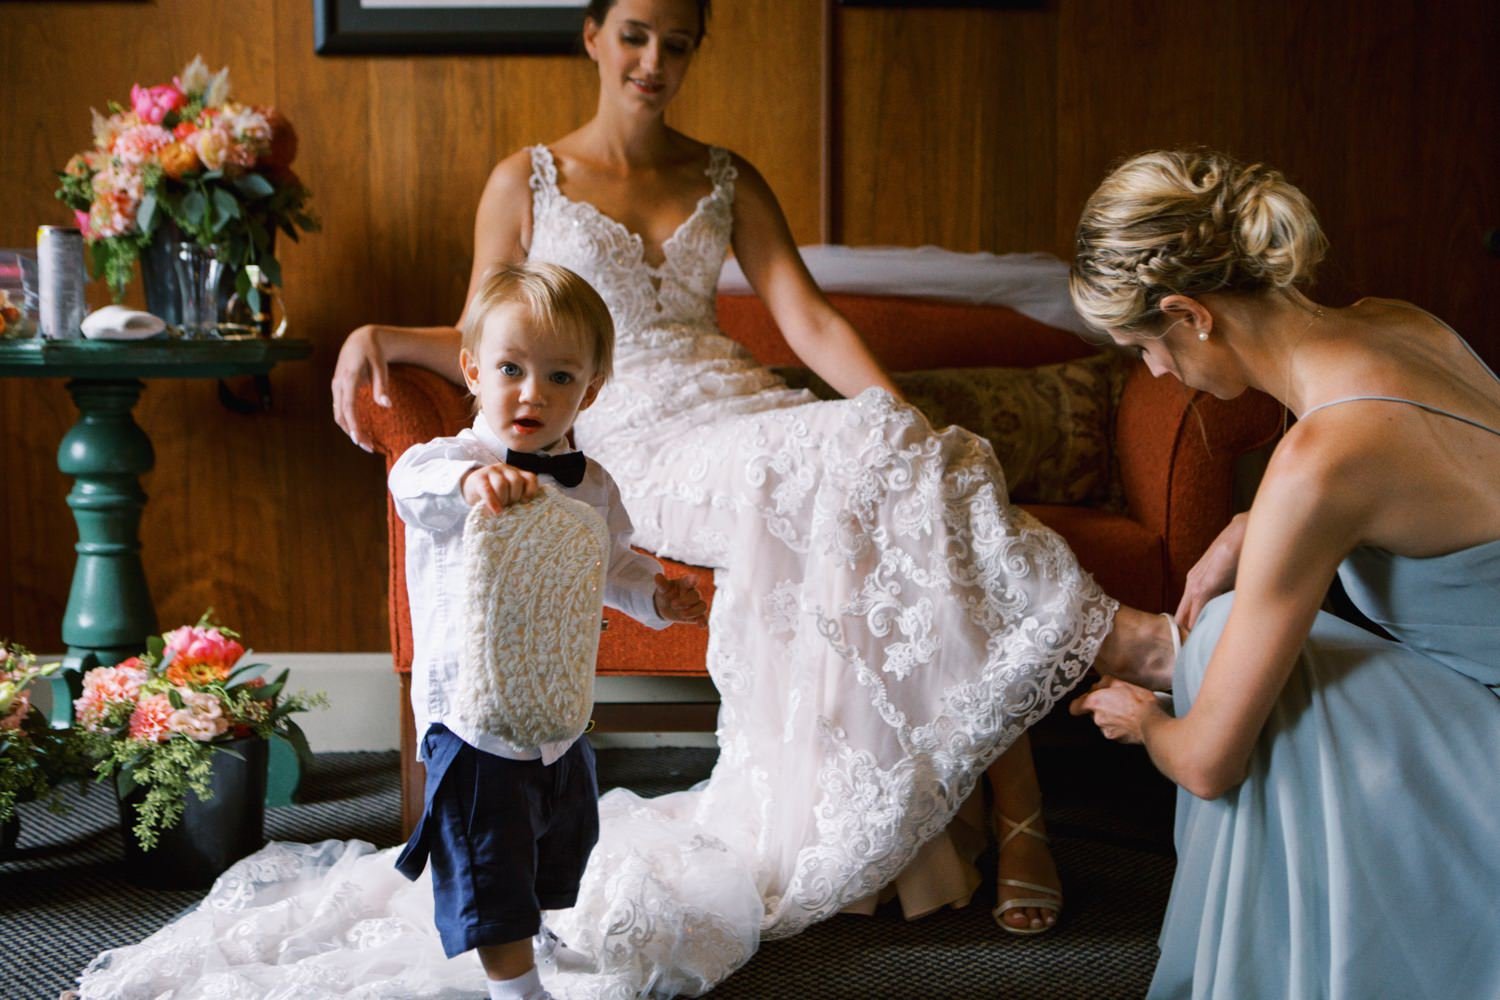  bride sits on couch as bridesmaid helps put on her shoes while little boy stands in front of them 